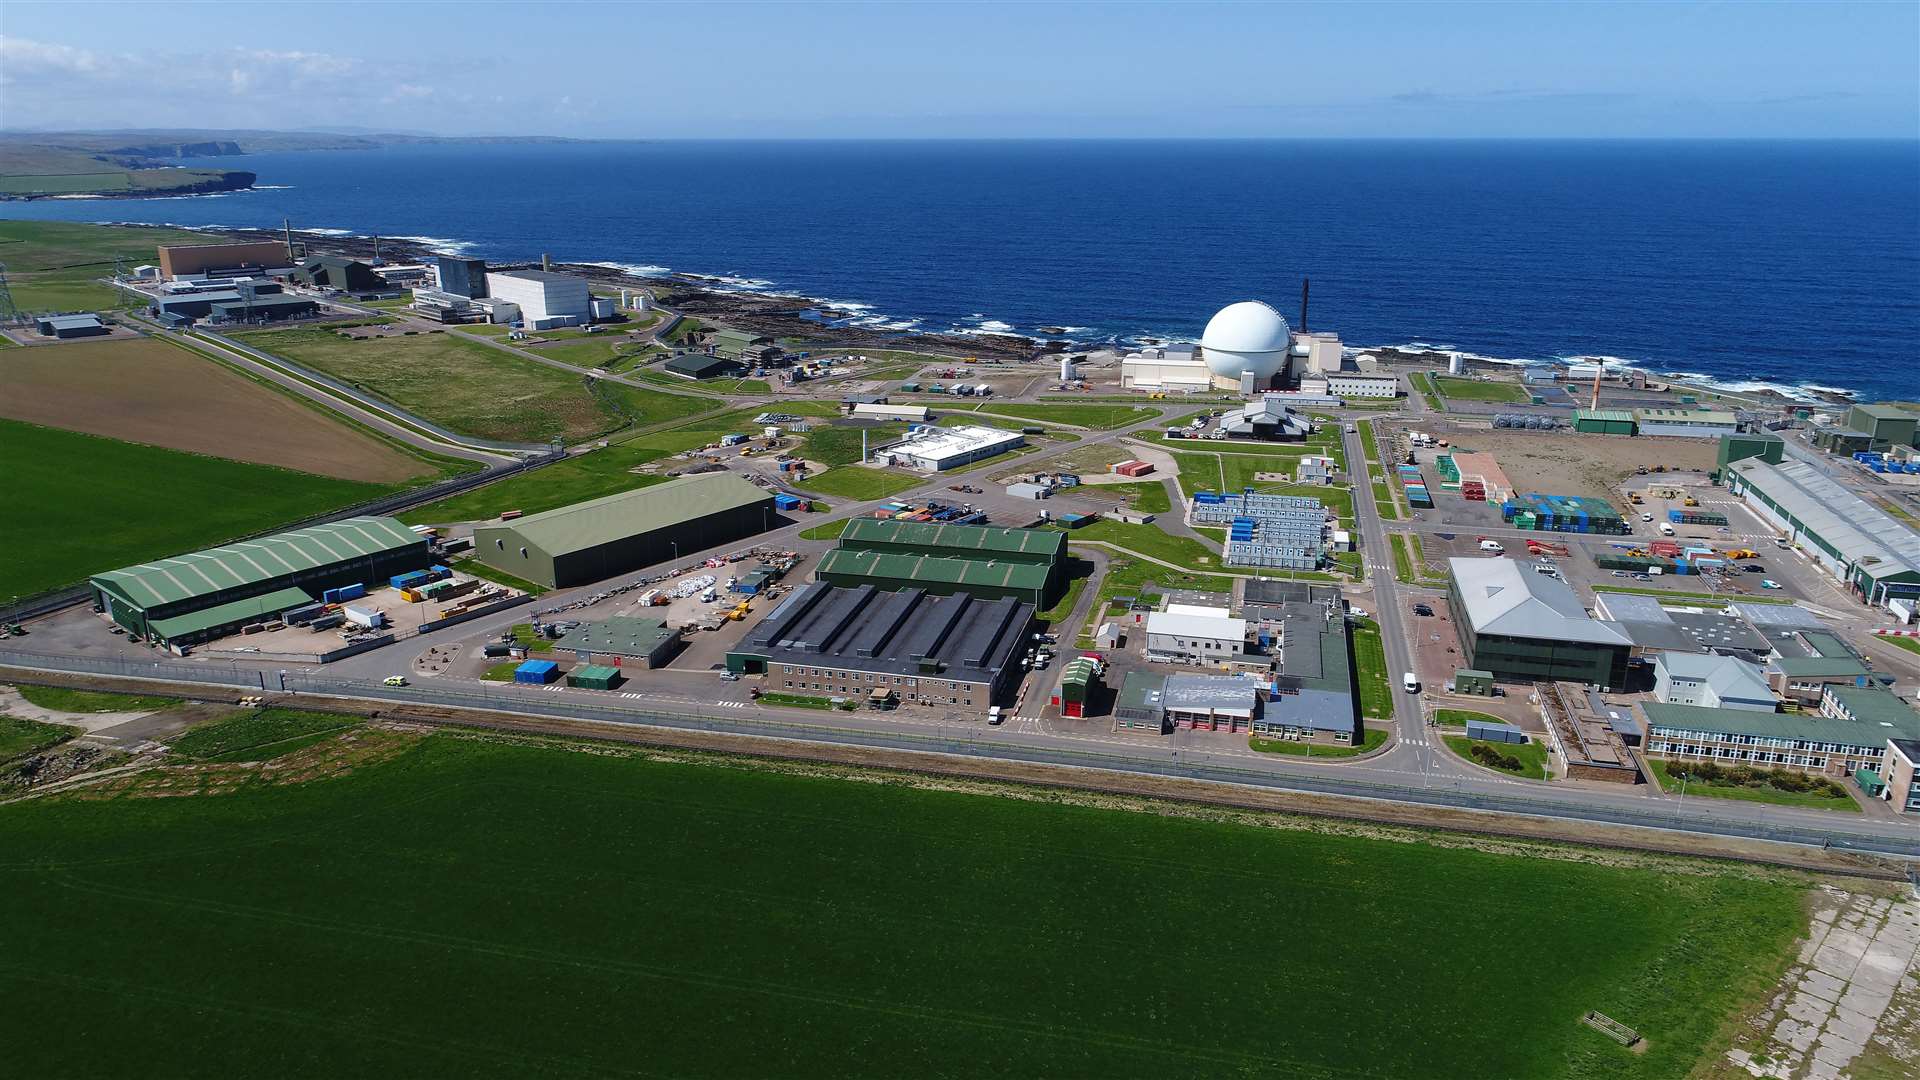 The two sites at Dounreay could each be decommissioned by the NDA.